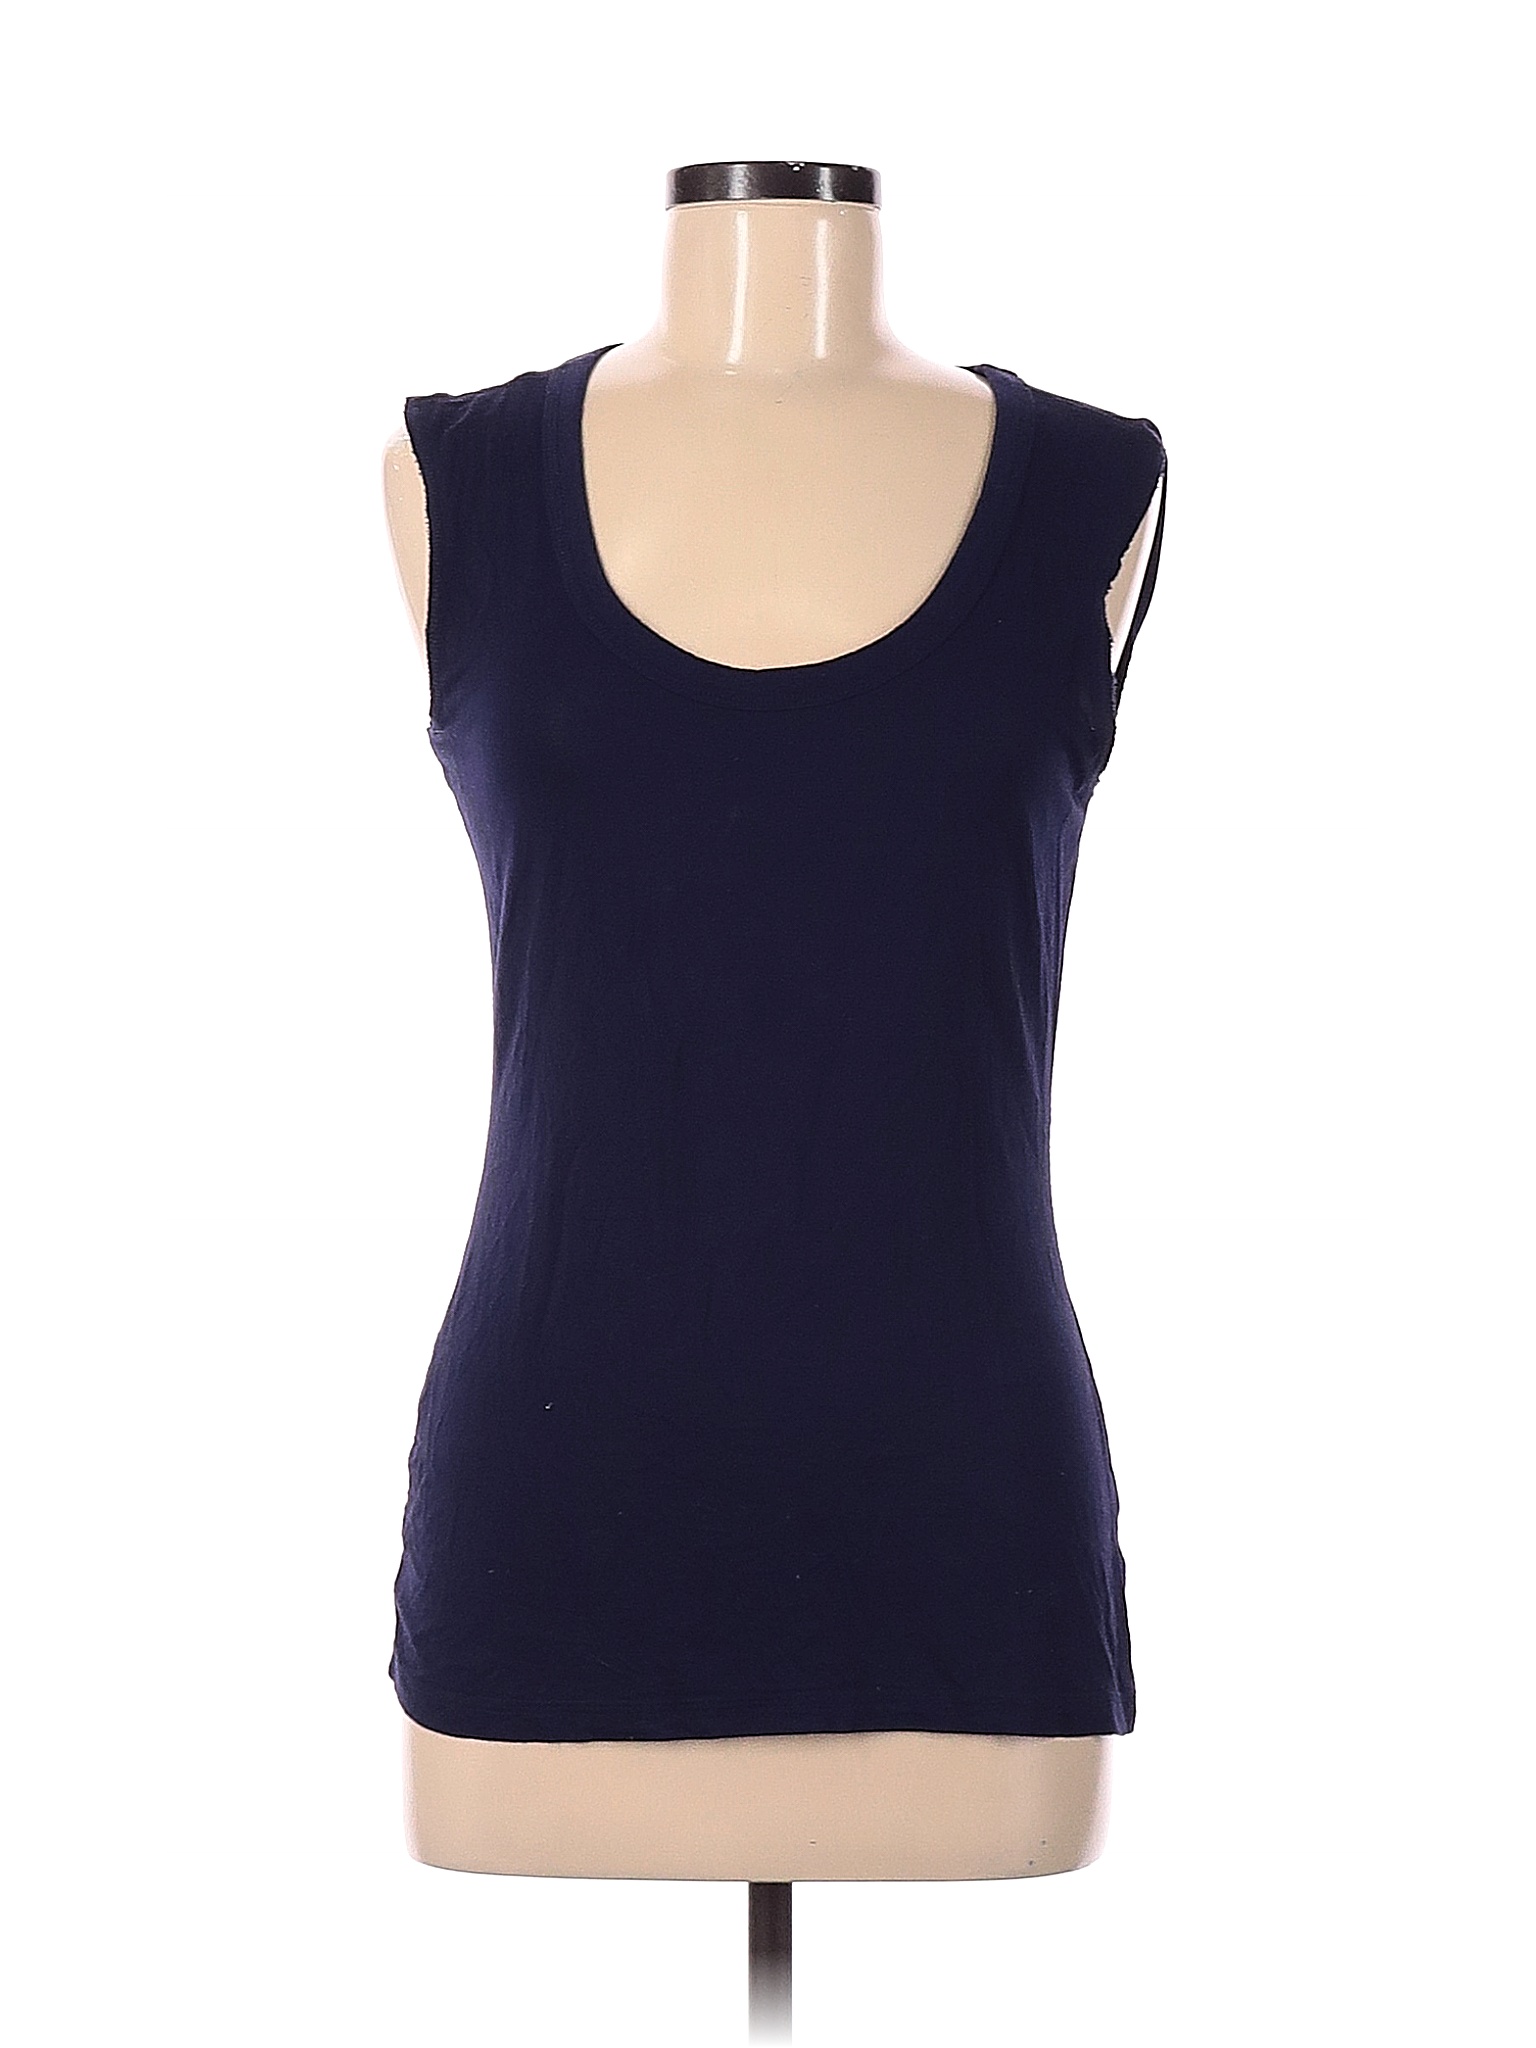 Cable & Gauge Solid Blue Sleeveless Top Size M - 52% off | thredUP